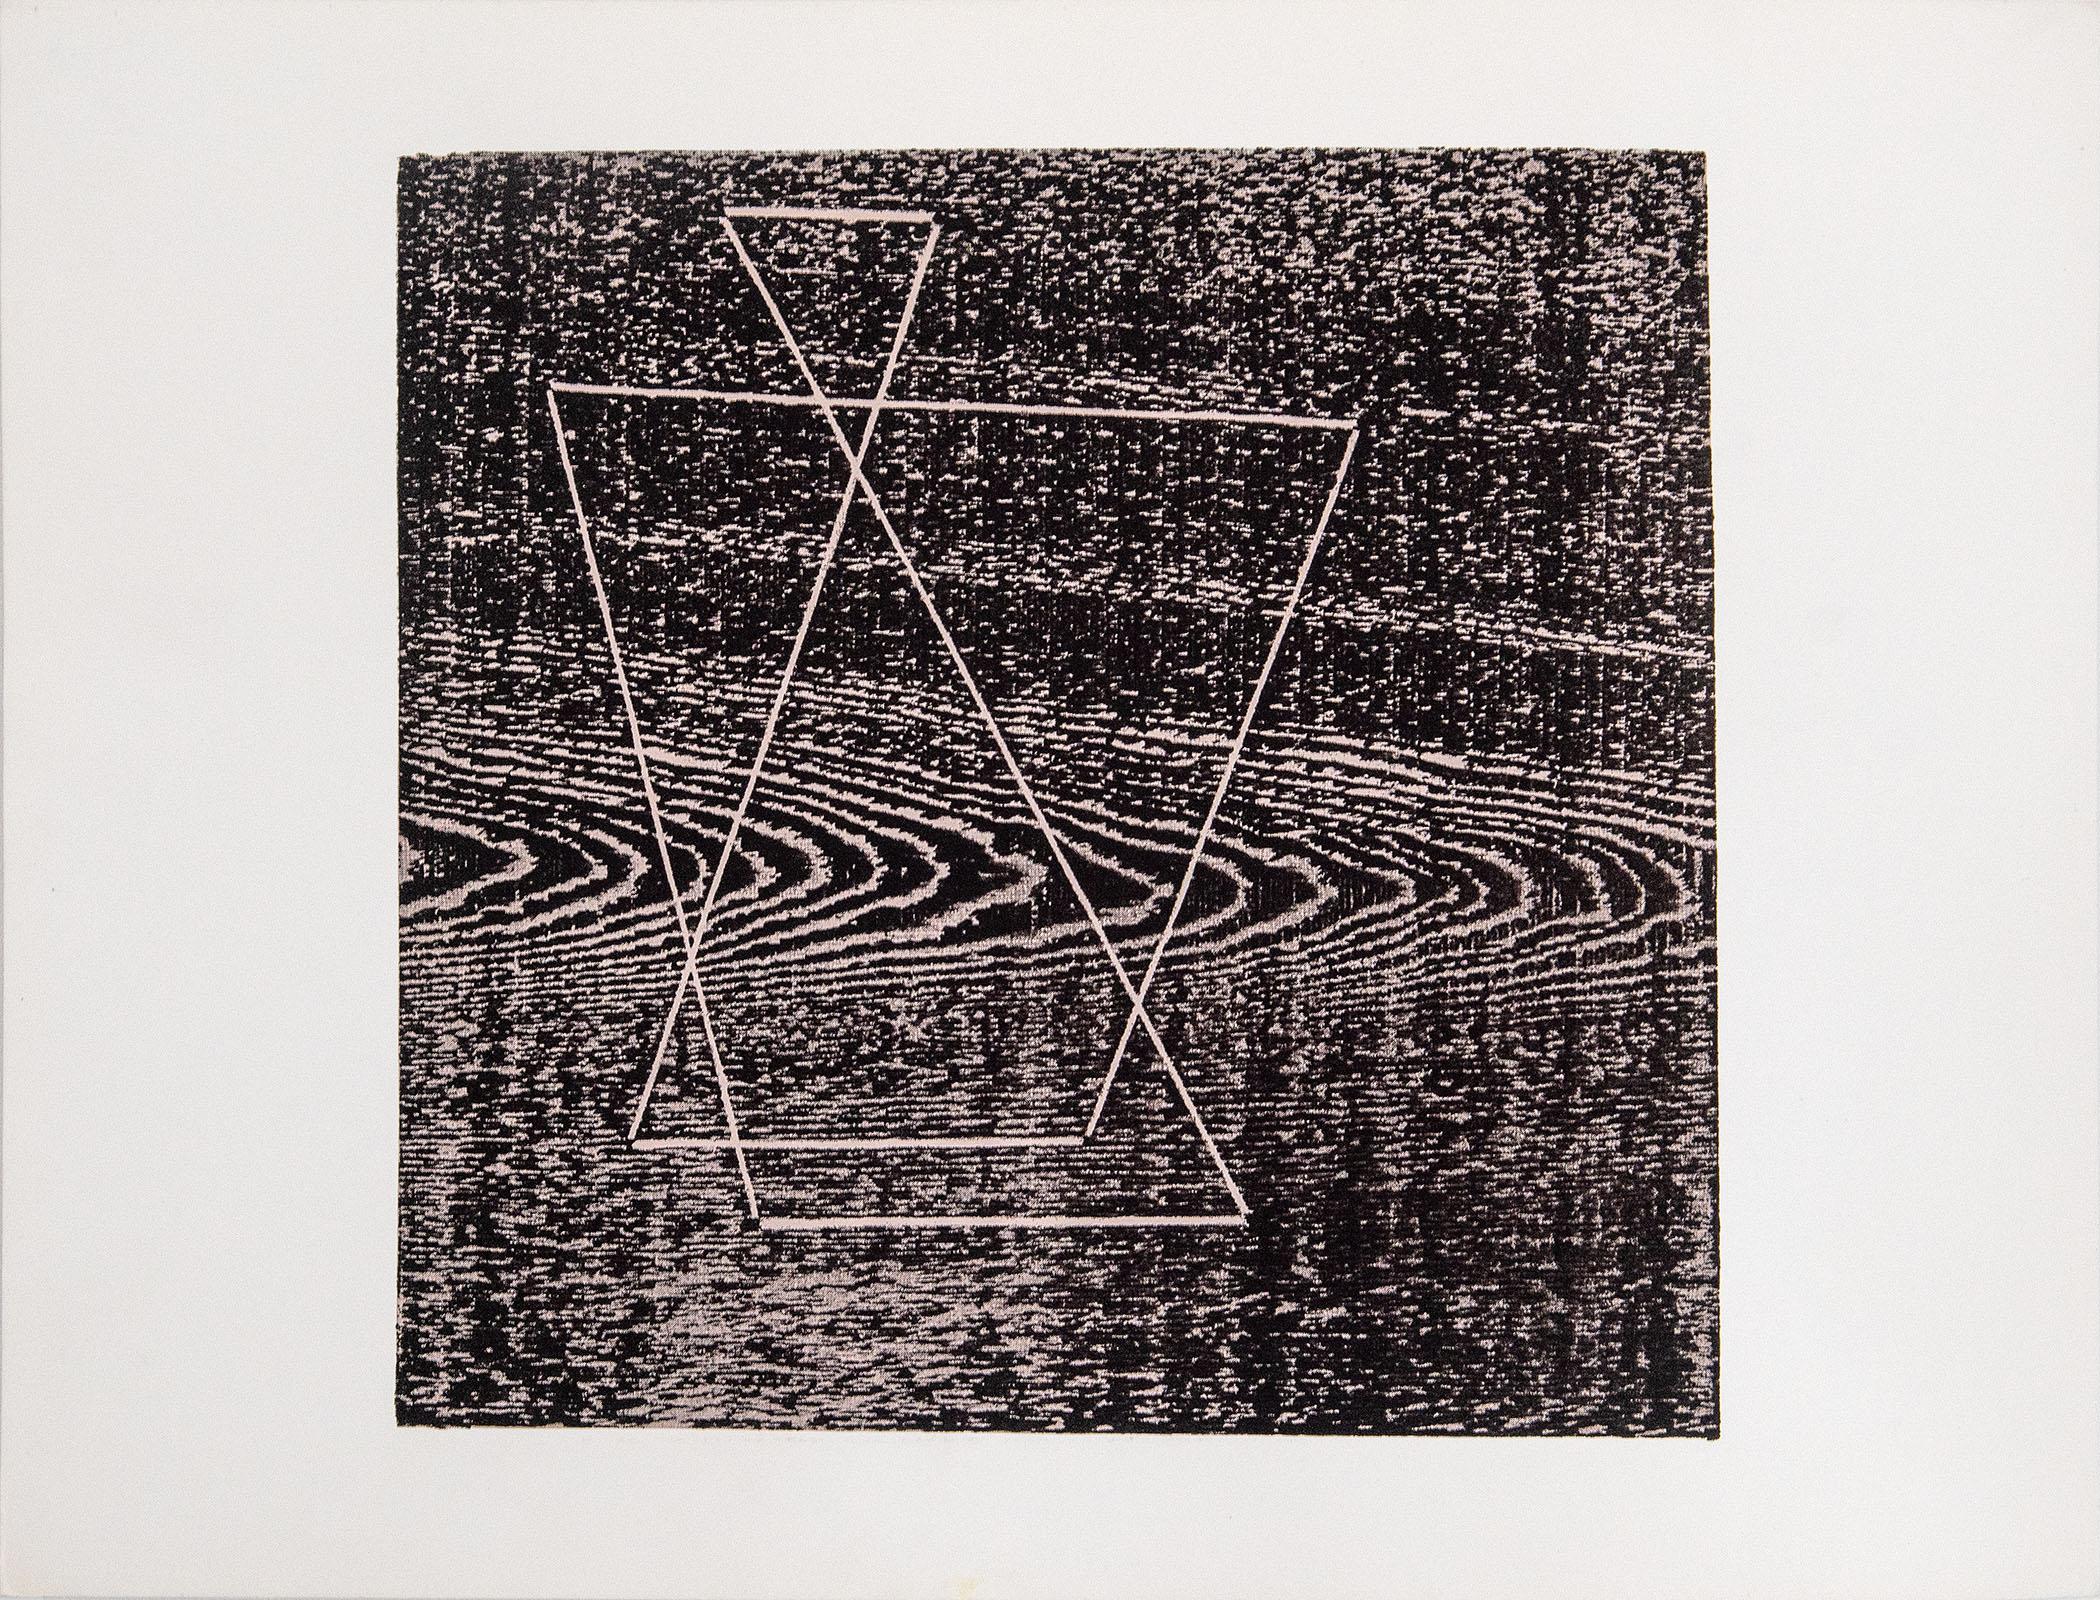 Formulation : Articulation. Folio of 2 prints - Abstract Print by Josef Albers